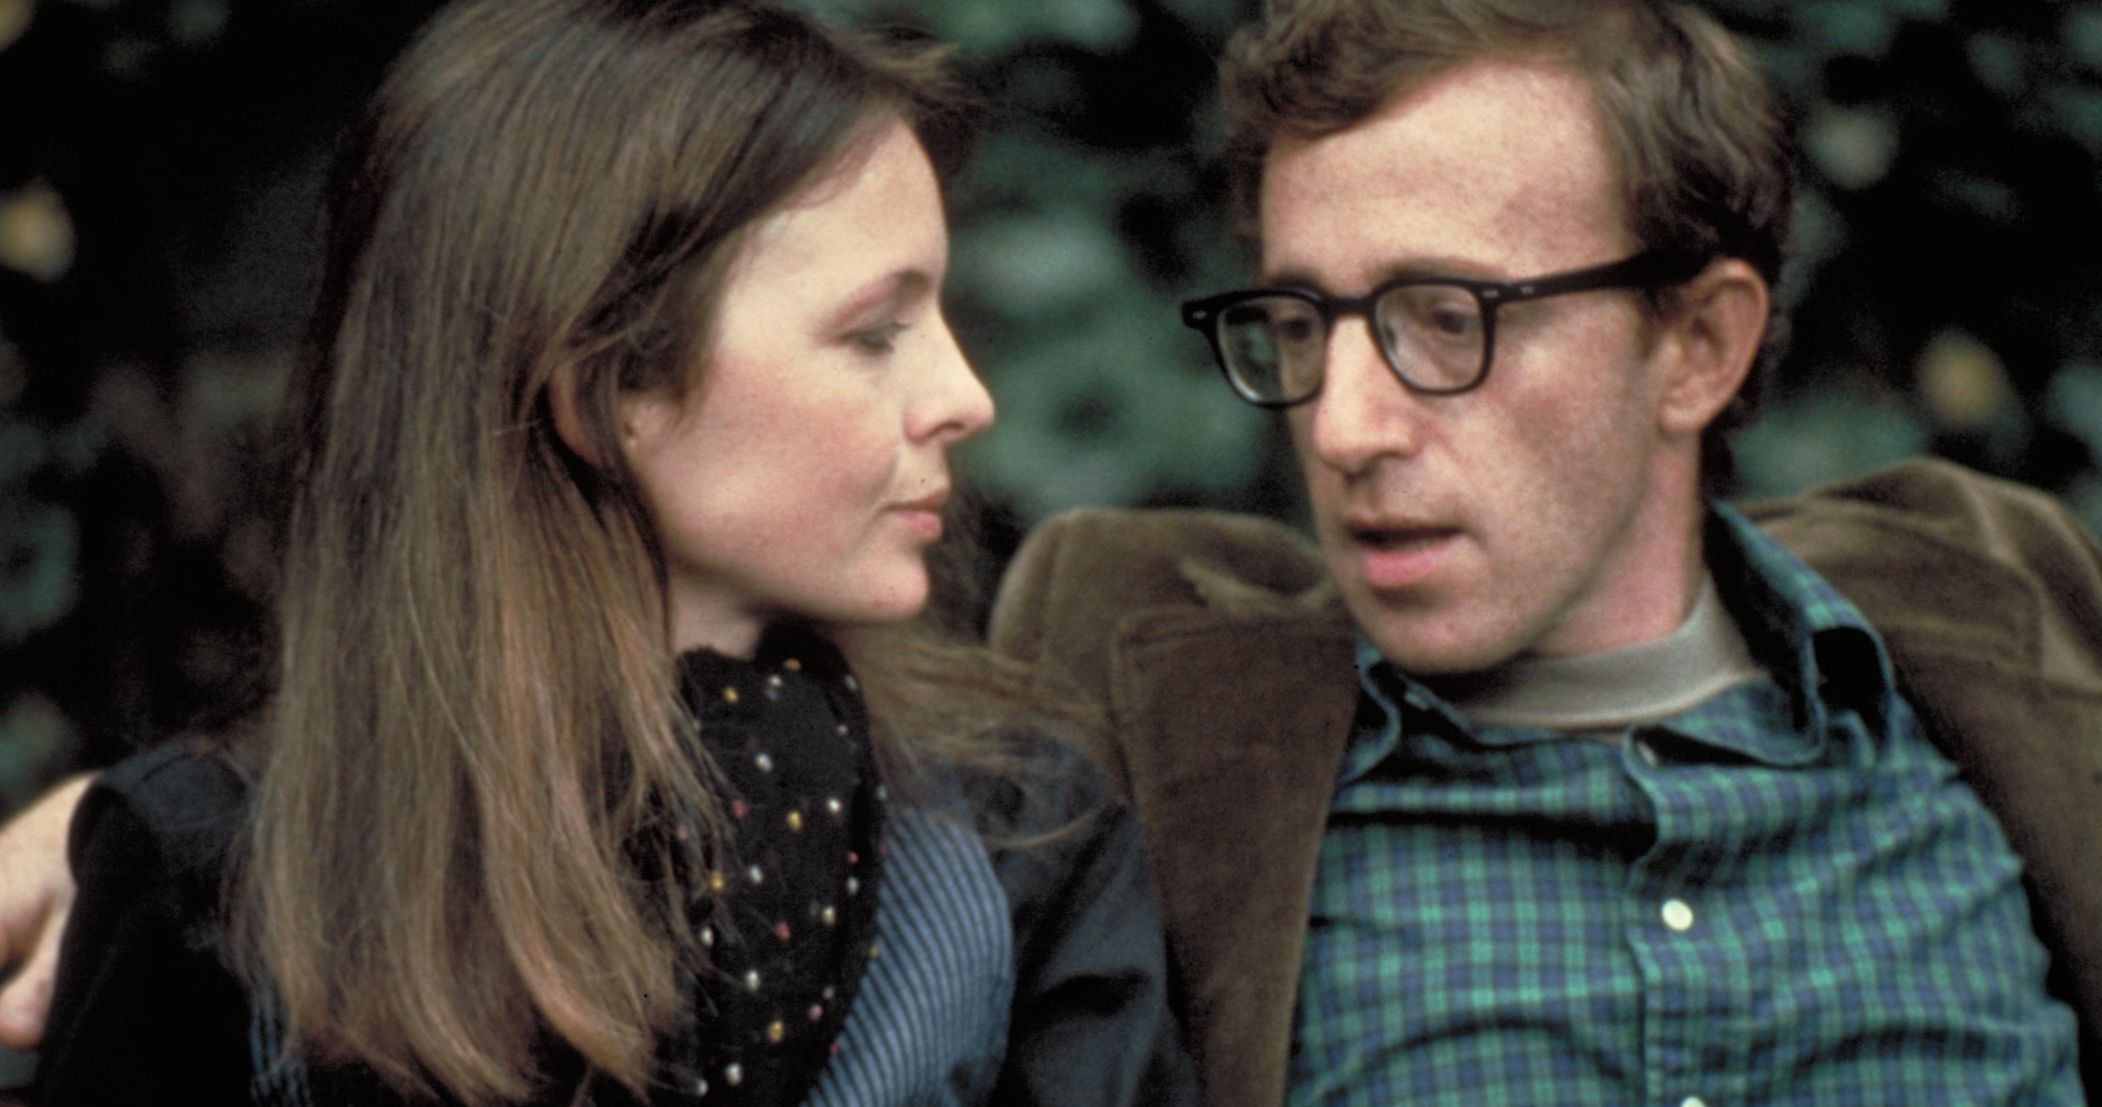 Woody Allen's Memoir Sneaks Into Stores from New Publisher After Backlash